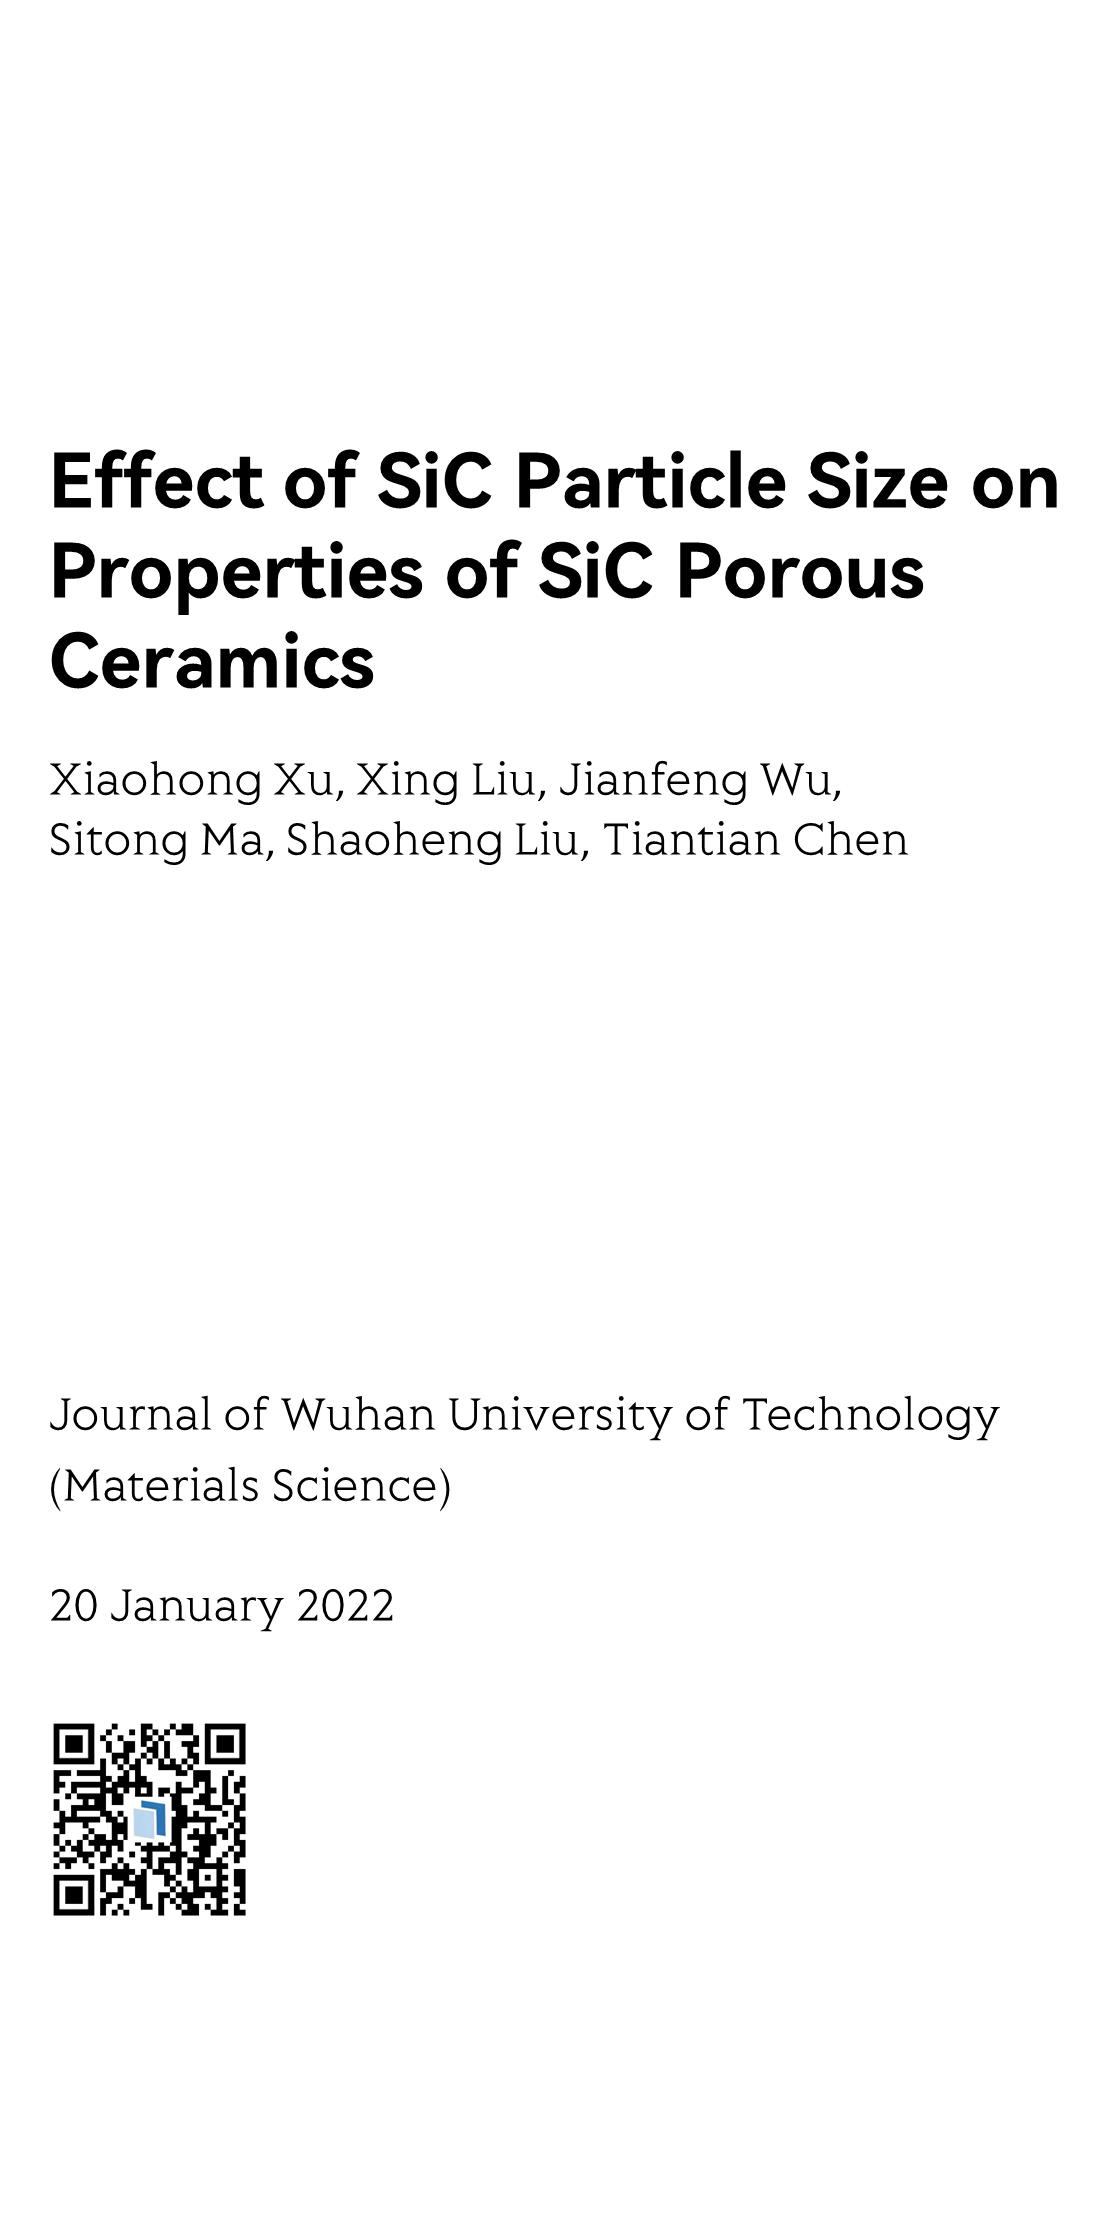 Effect of SiC Particle Size on Properties of SiC Porous Ceramics_1